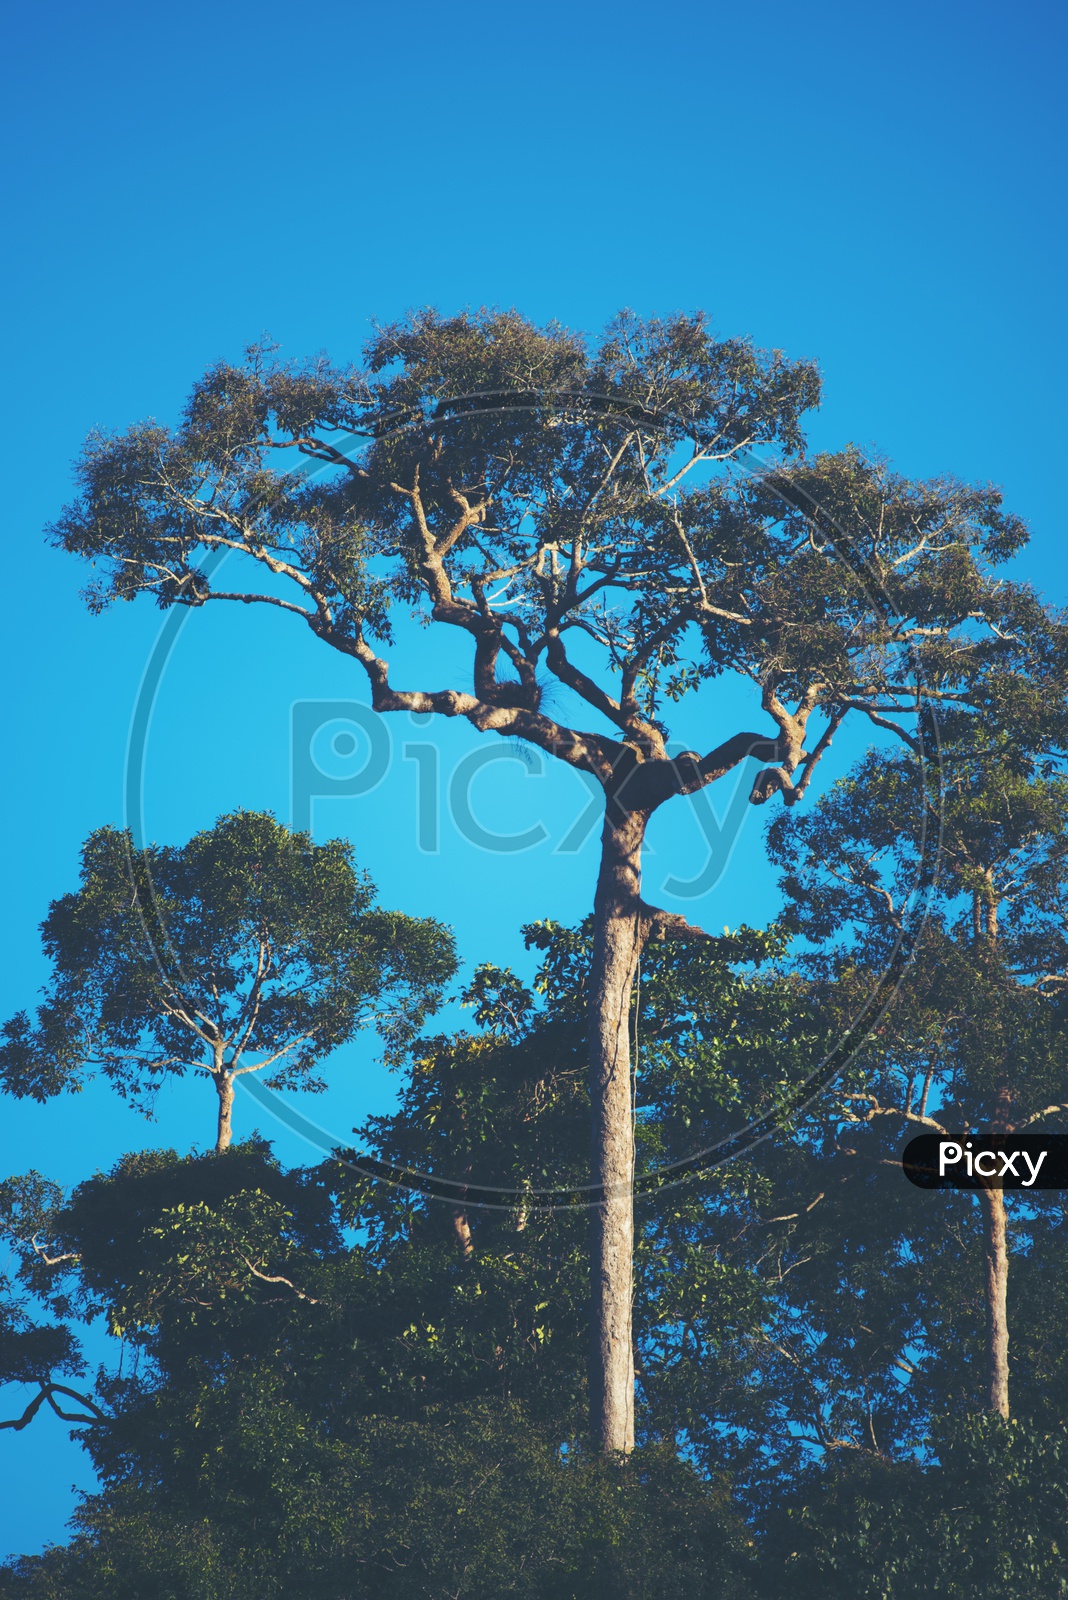 Trees In Tropical Forest With Blue Hour Sky